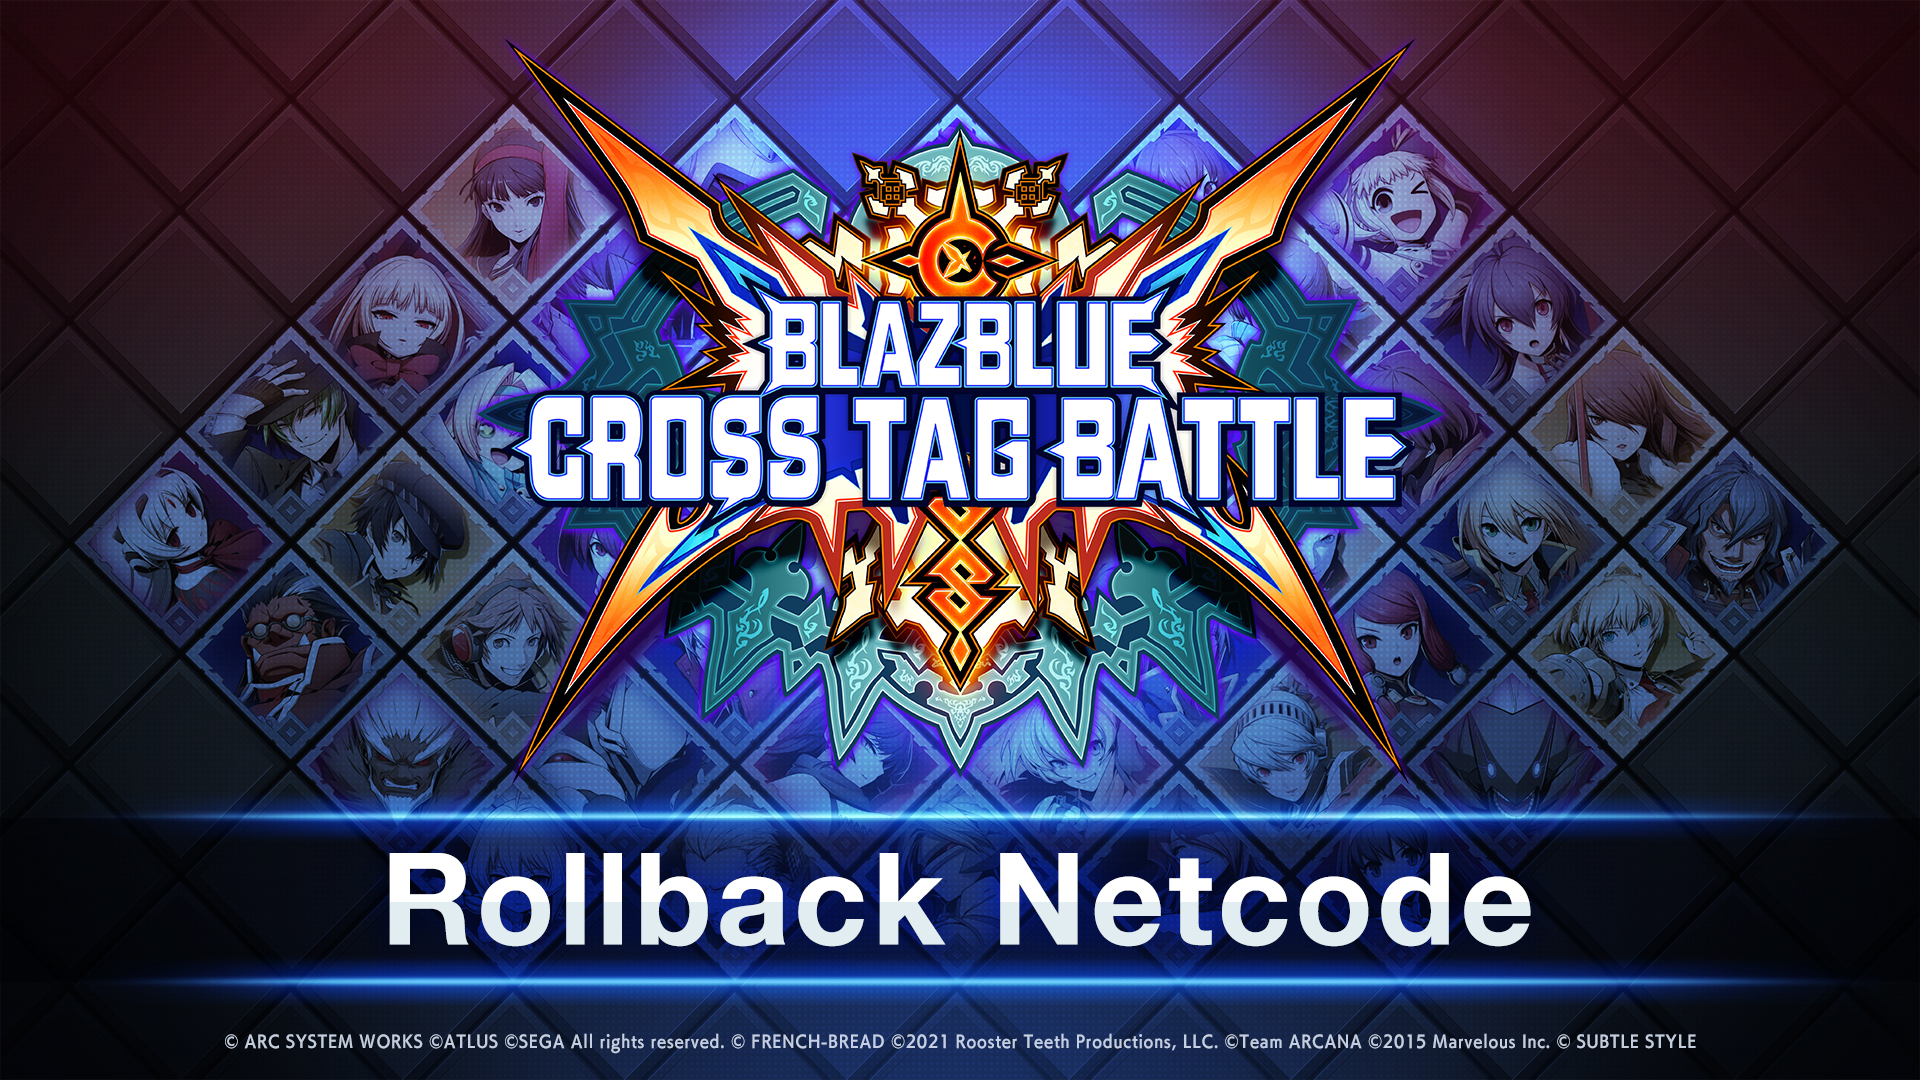 BLAZBLUE: CROSS TAG BATTLE Rollback Net Code available on April 14th